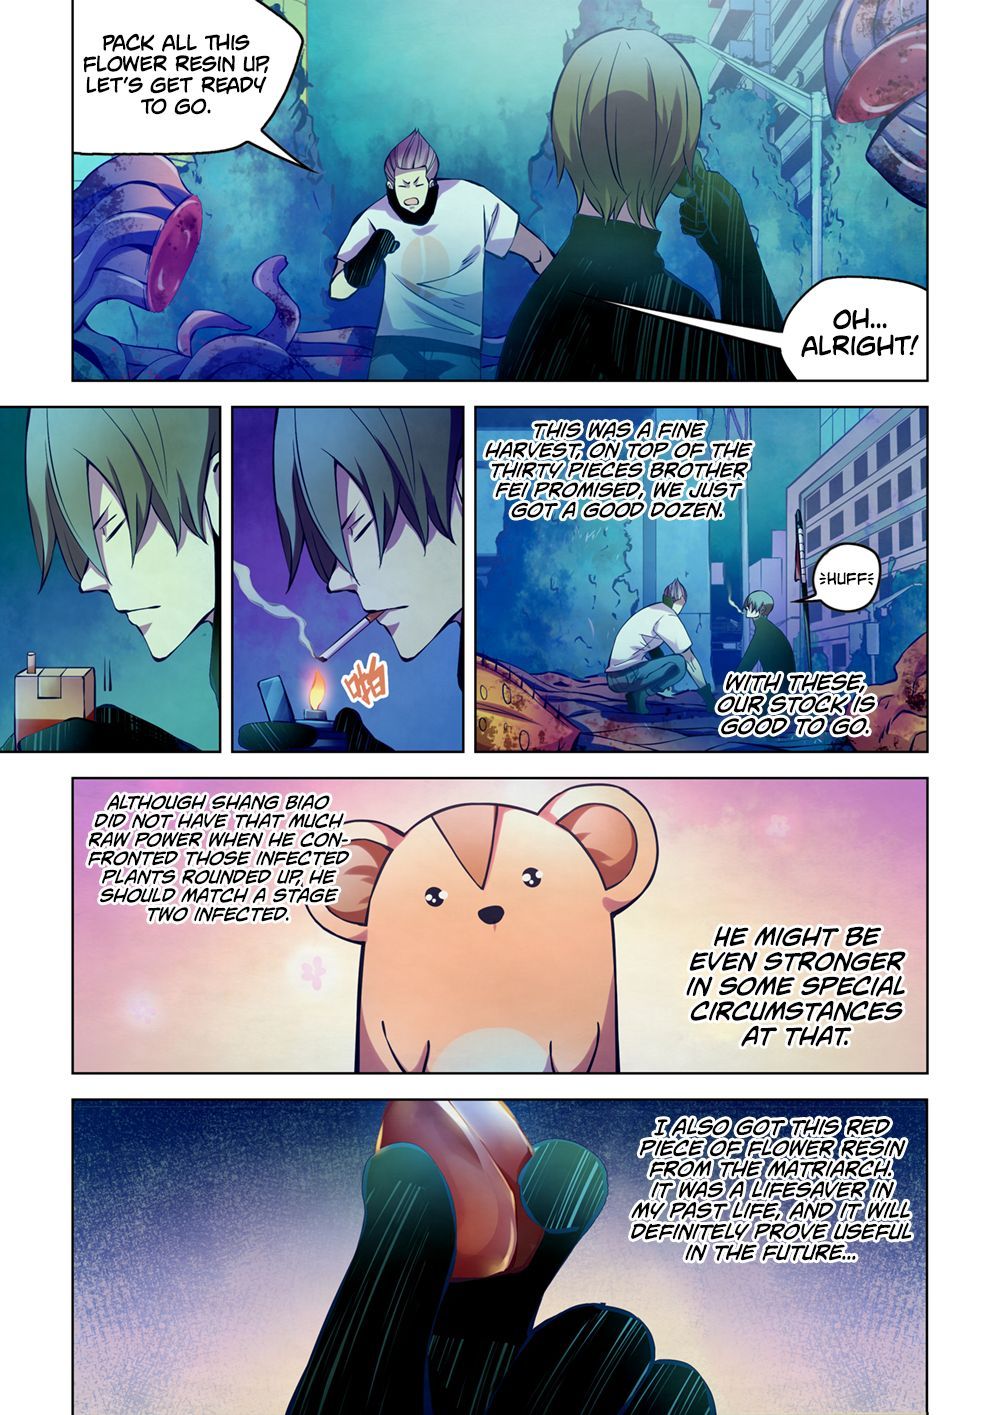 The Last Human Chapter 214 - Page 3